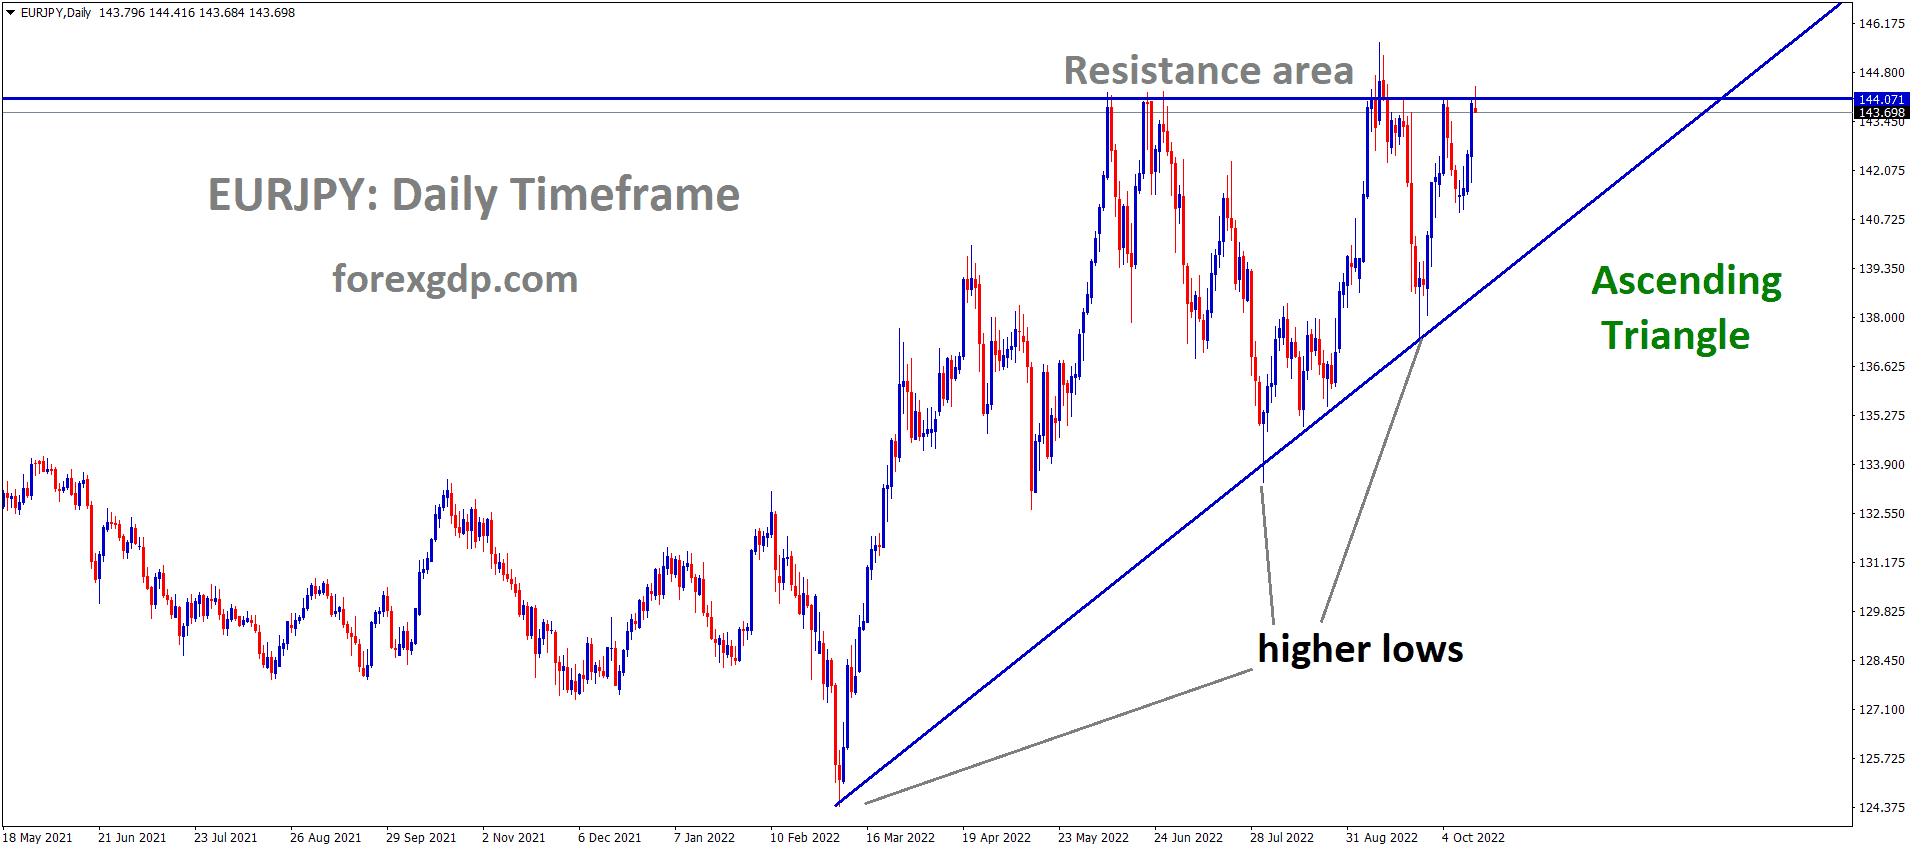 EURJPY is moving in an Ascending triangle pattern and the market has reached the resistance area of the pattern